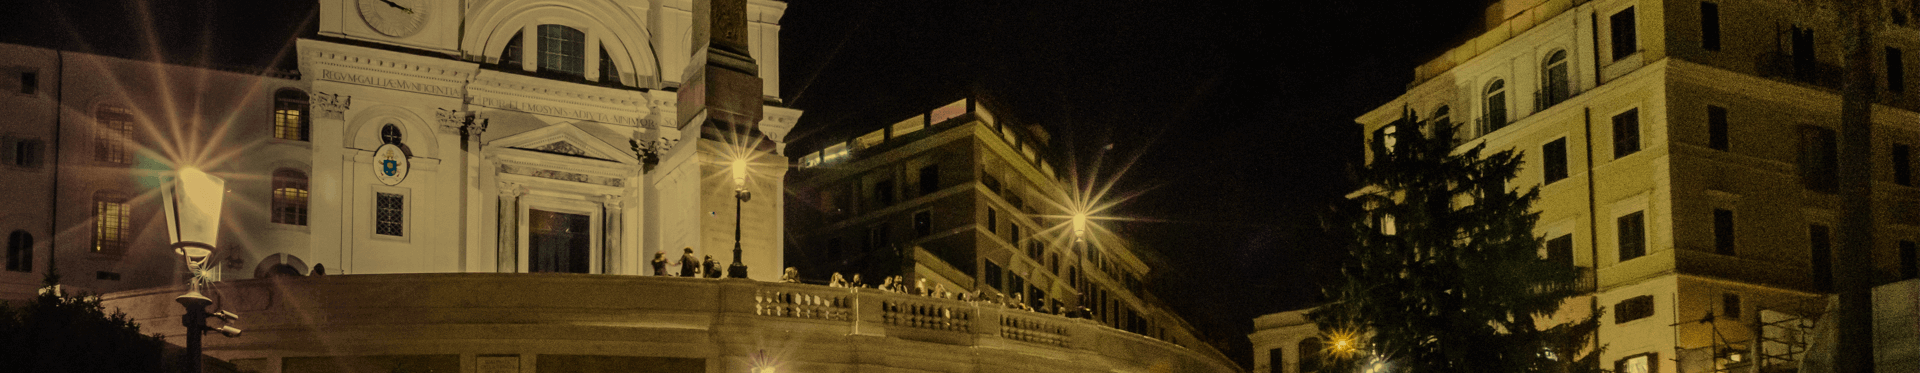 Acea’s contribution to lighting up the steps at Trinità dei Monti in Rome